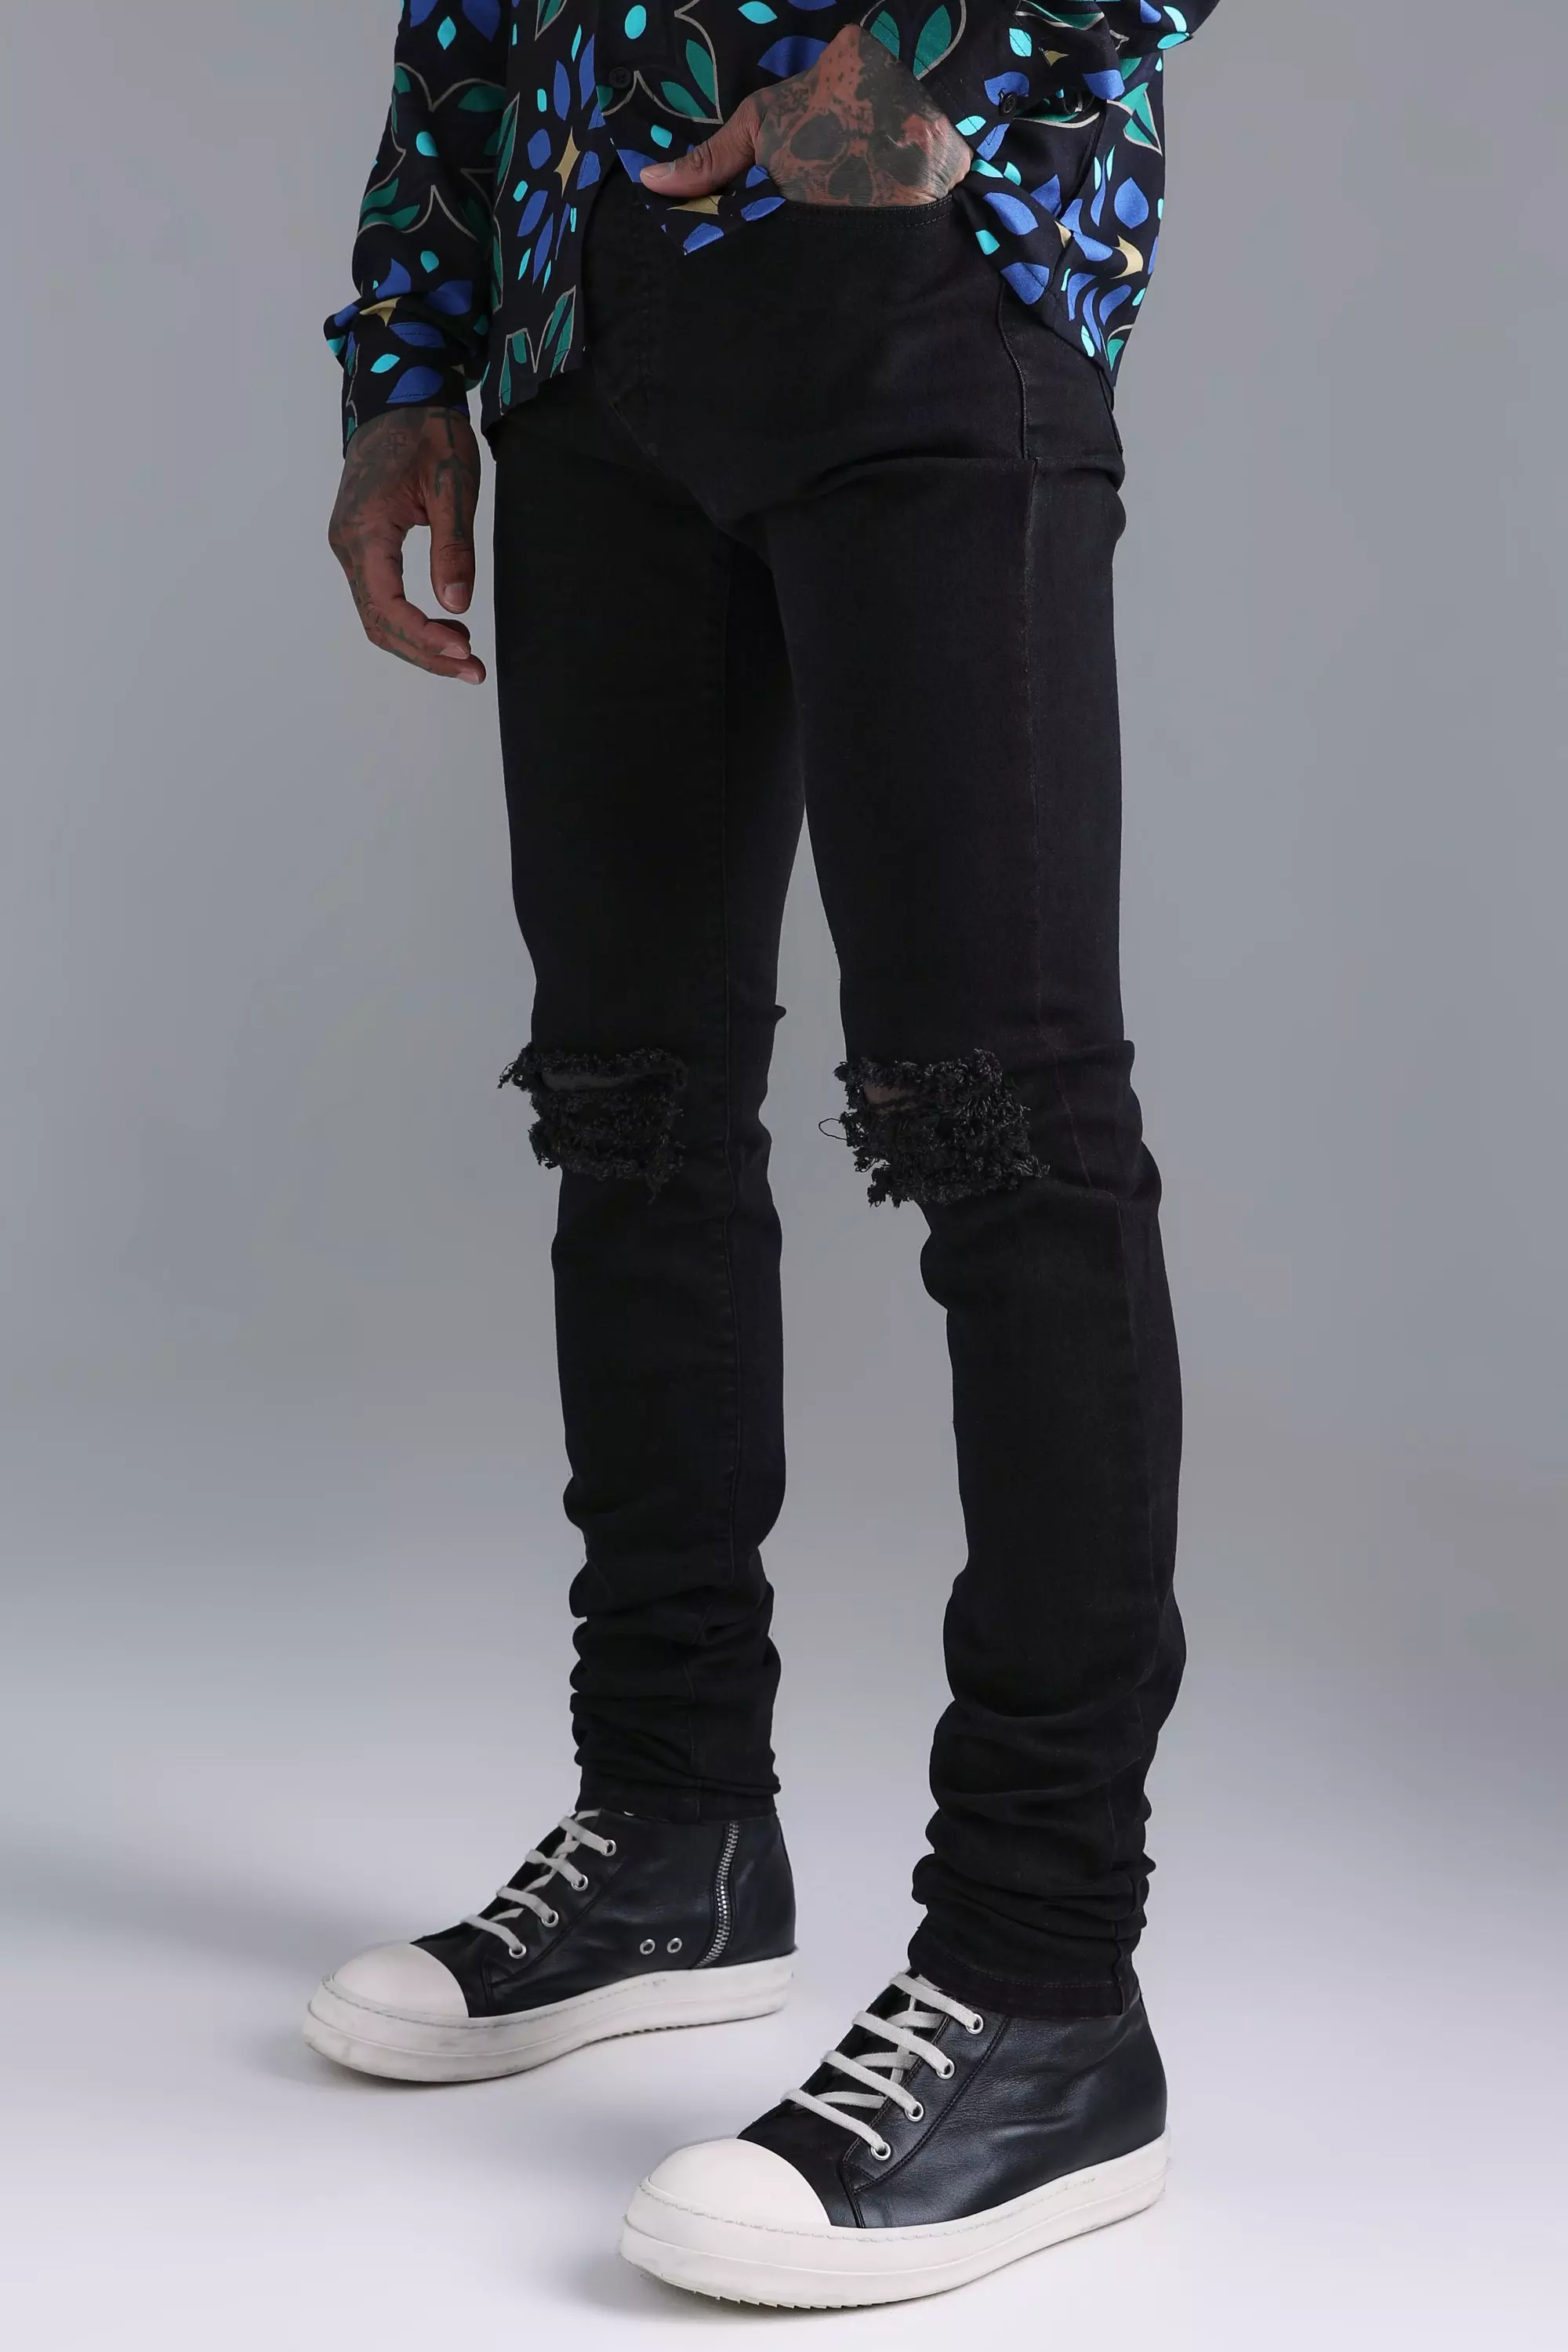 Ash Grey Skinny Stretch Stacked Ripped Knee Jeans